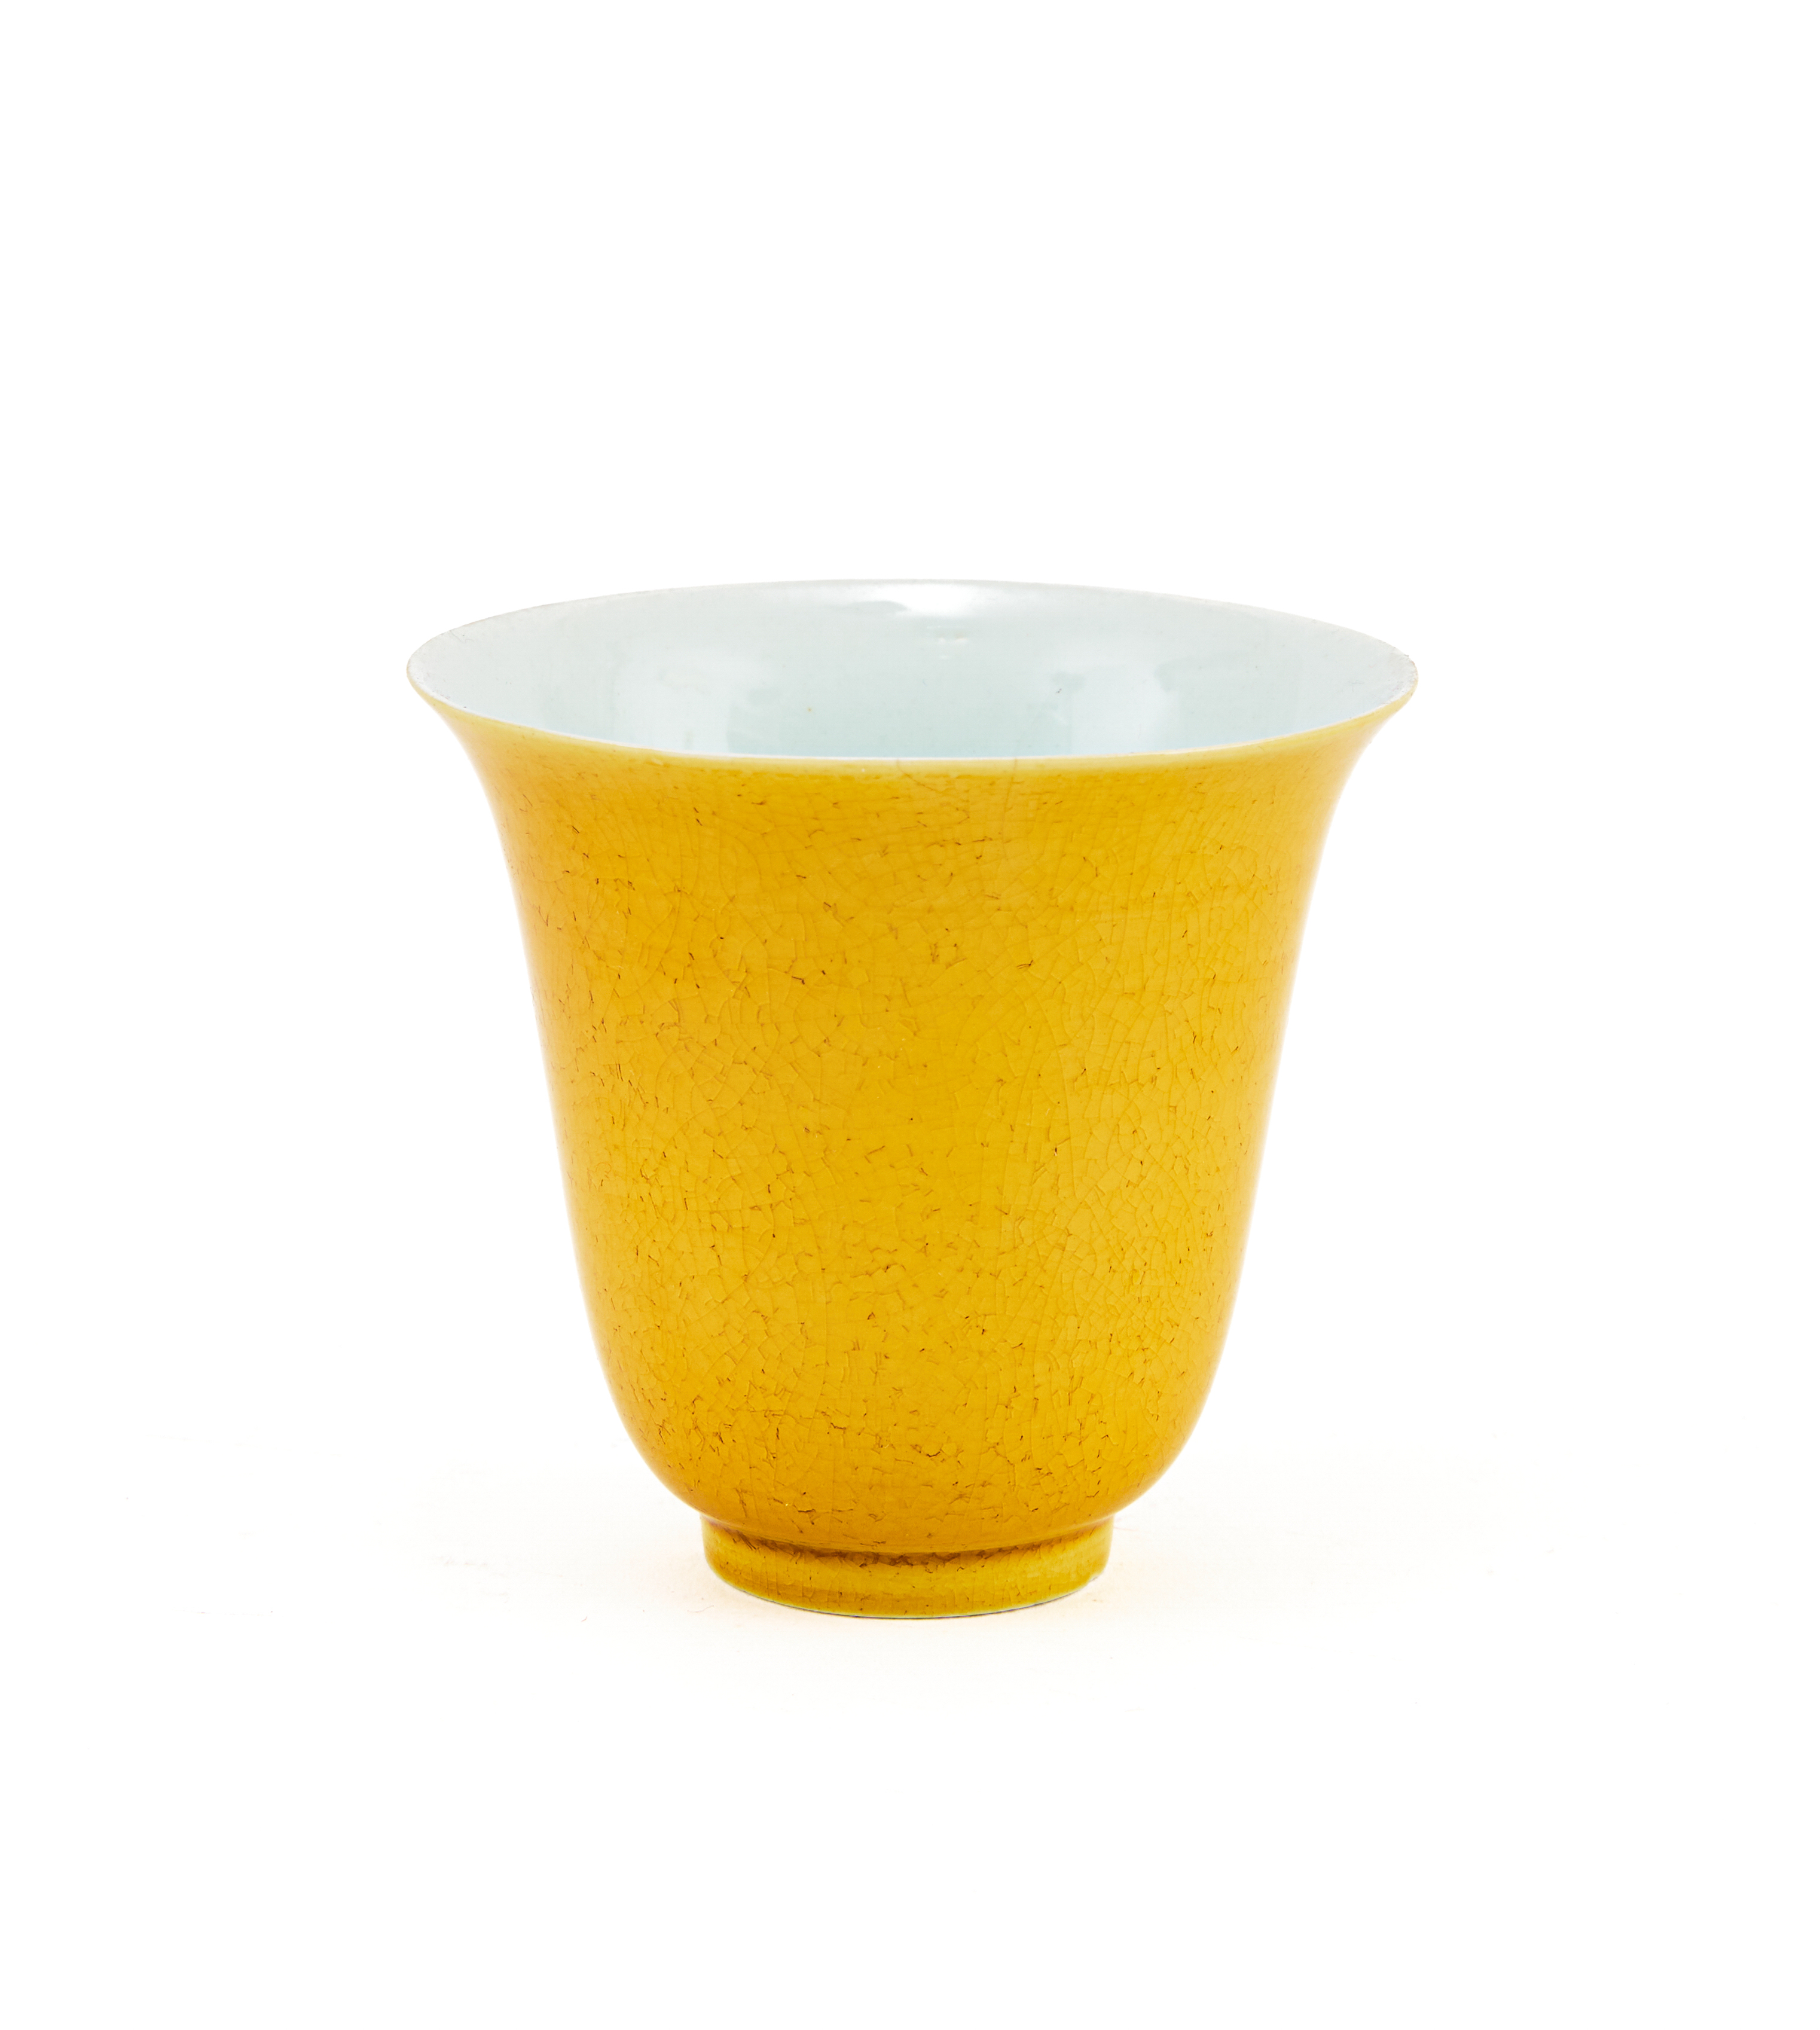 A CHINESE YELLOW MONOCHROME WINE CUP, QING DYNASTY (1644-1911)